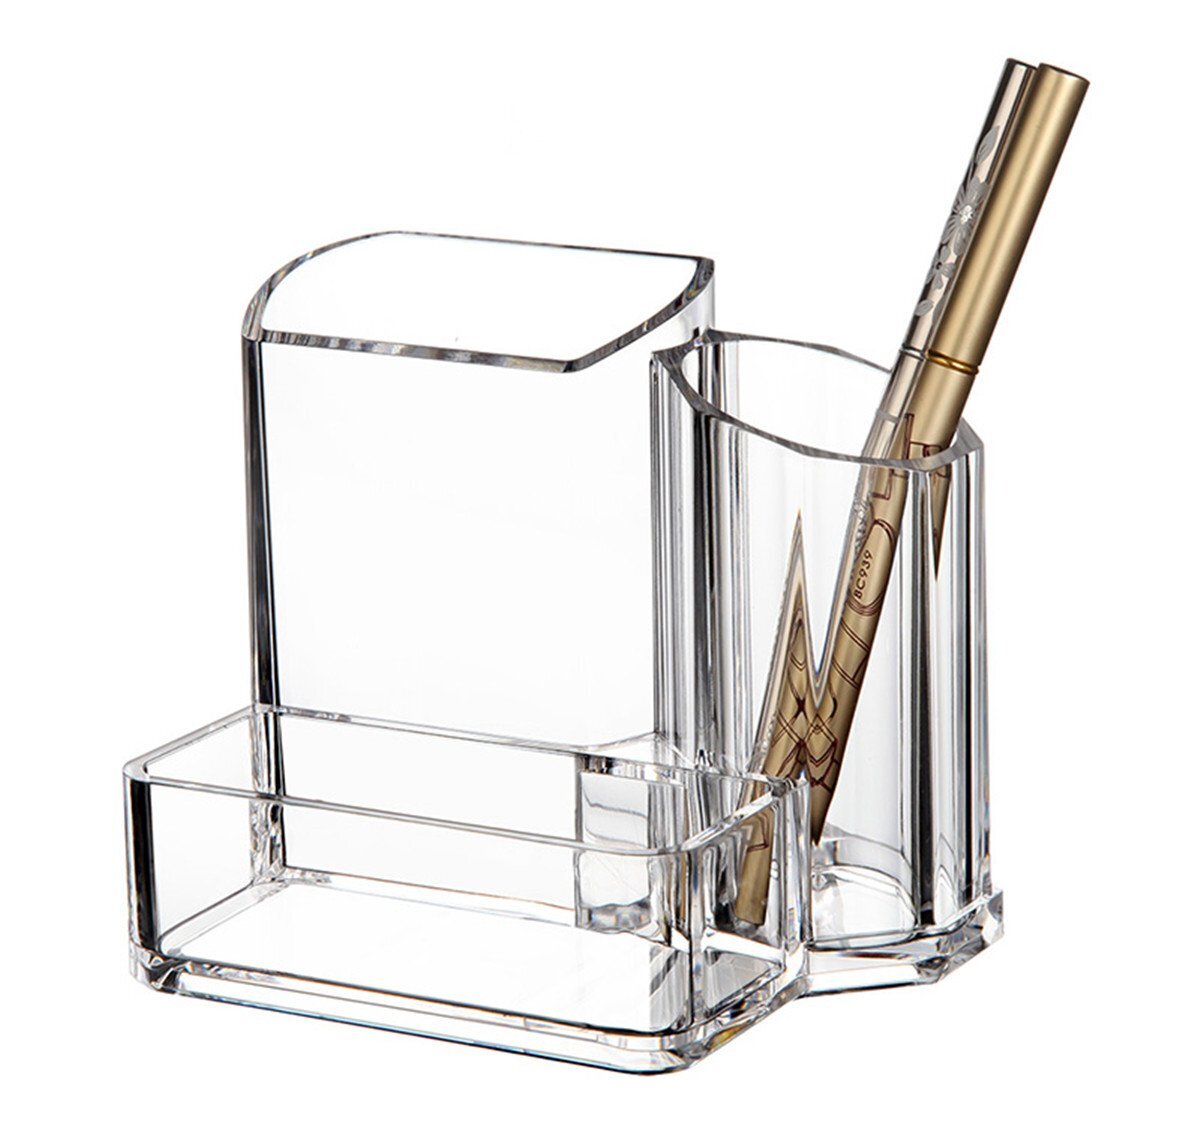 Multifunction Clear Acrylic Desk Organizer Pen Holder with Business Card Holder